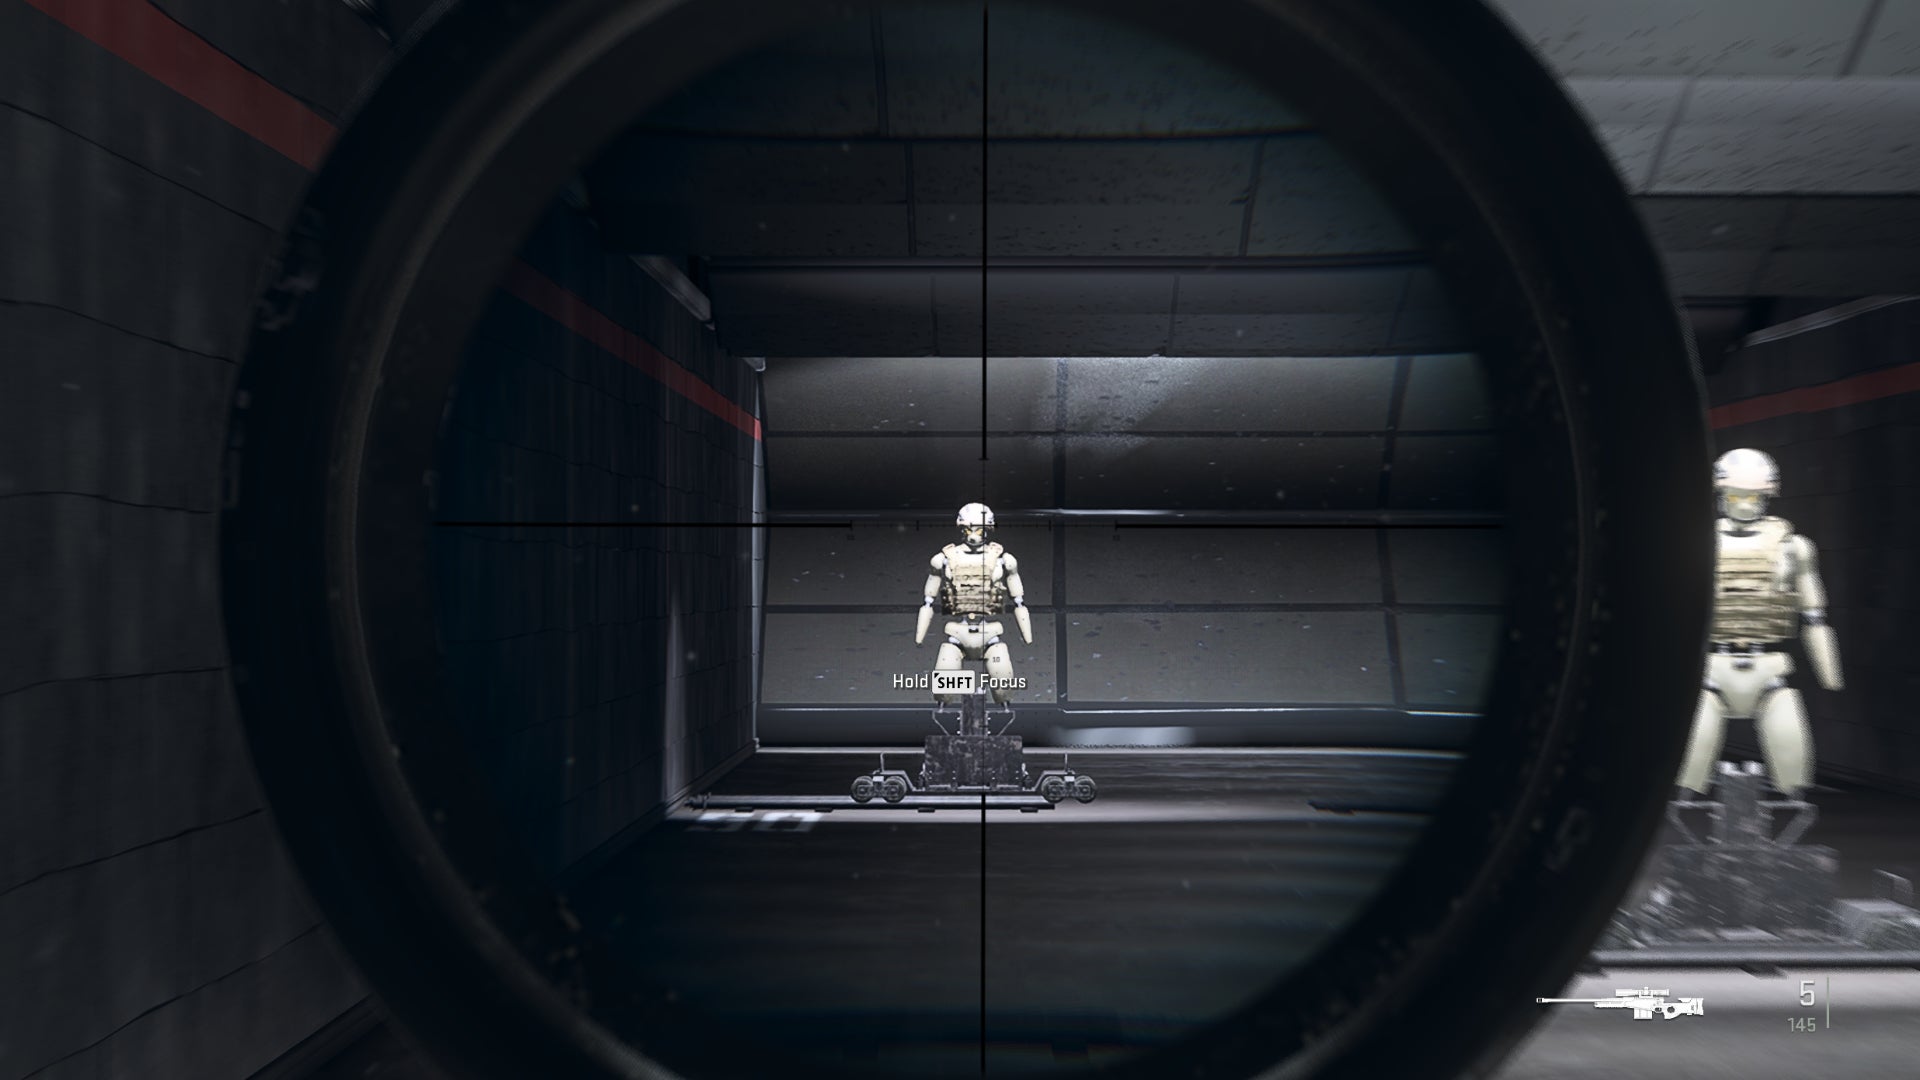 The player in Warzone 2.0 aims at a training dummy with the Victus XMR default scope.